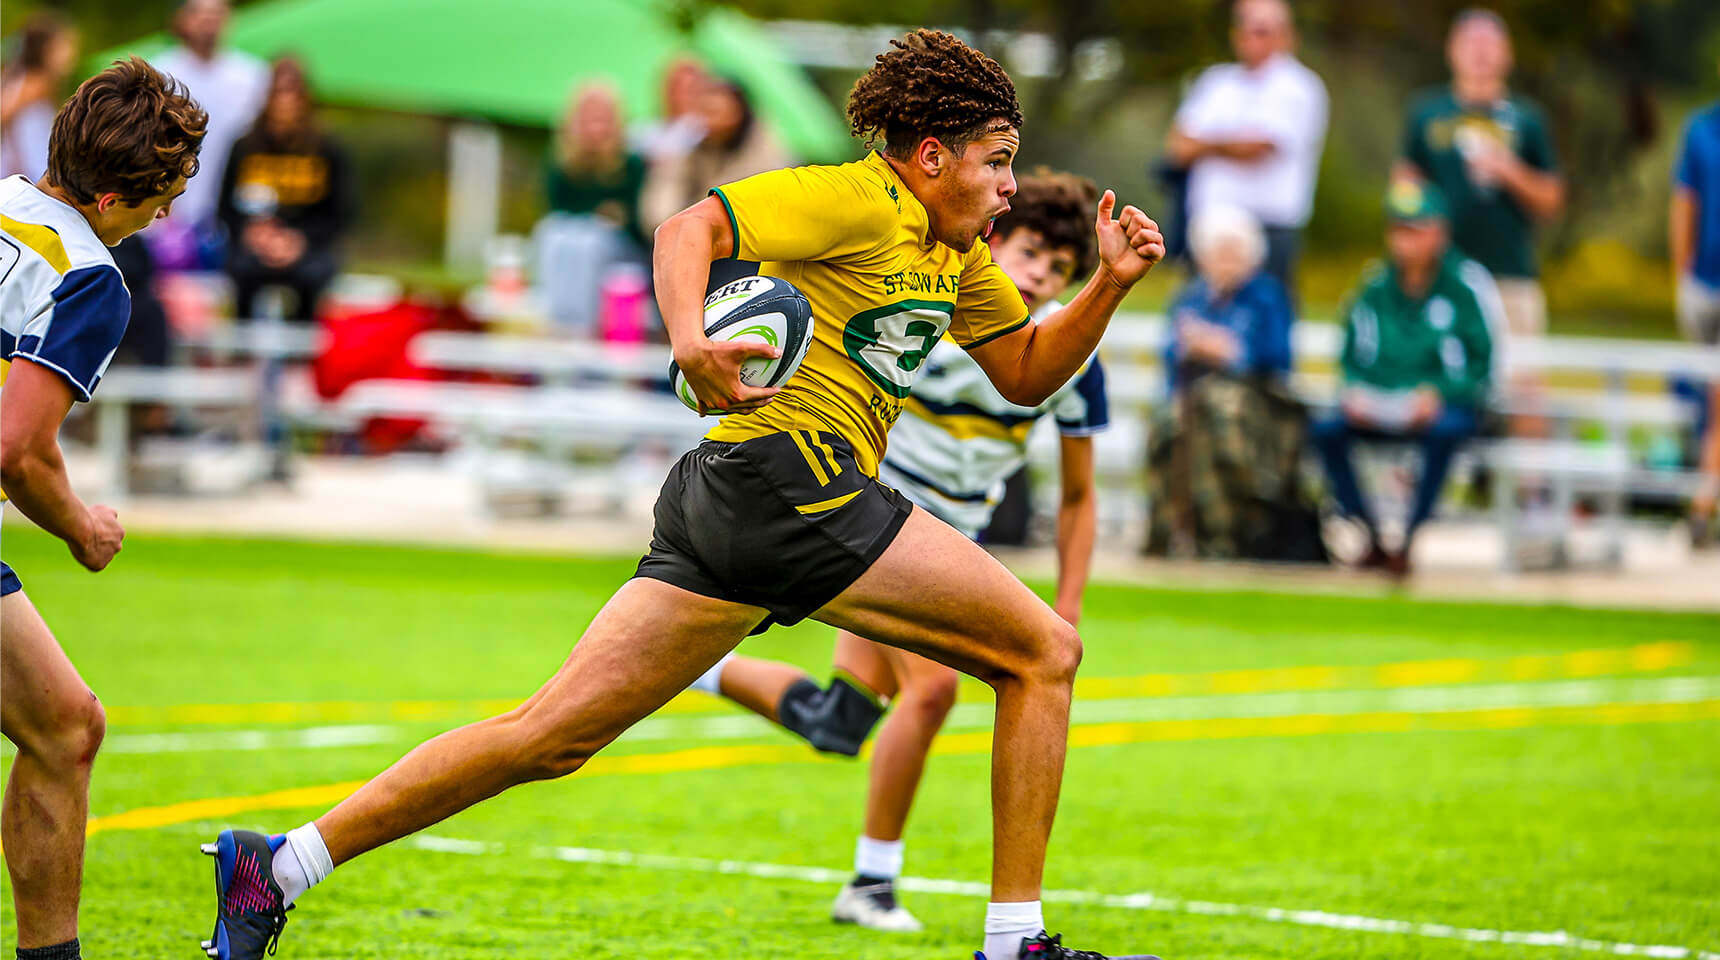 st. edward rugby sevens player running during a match